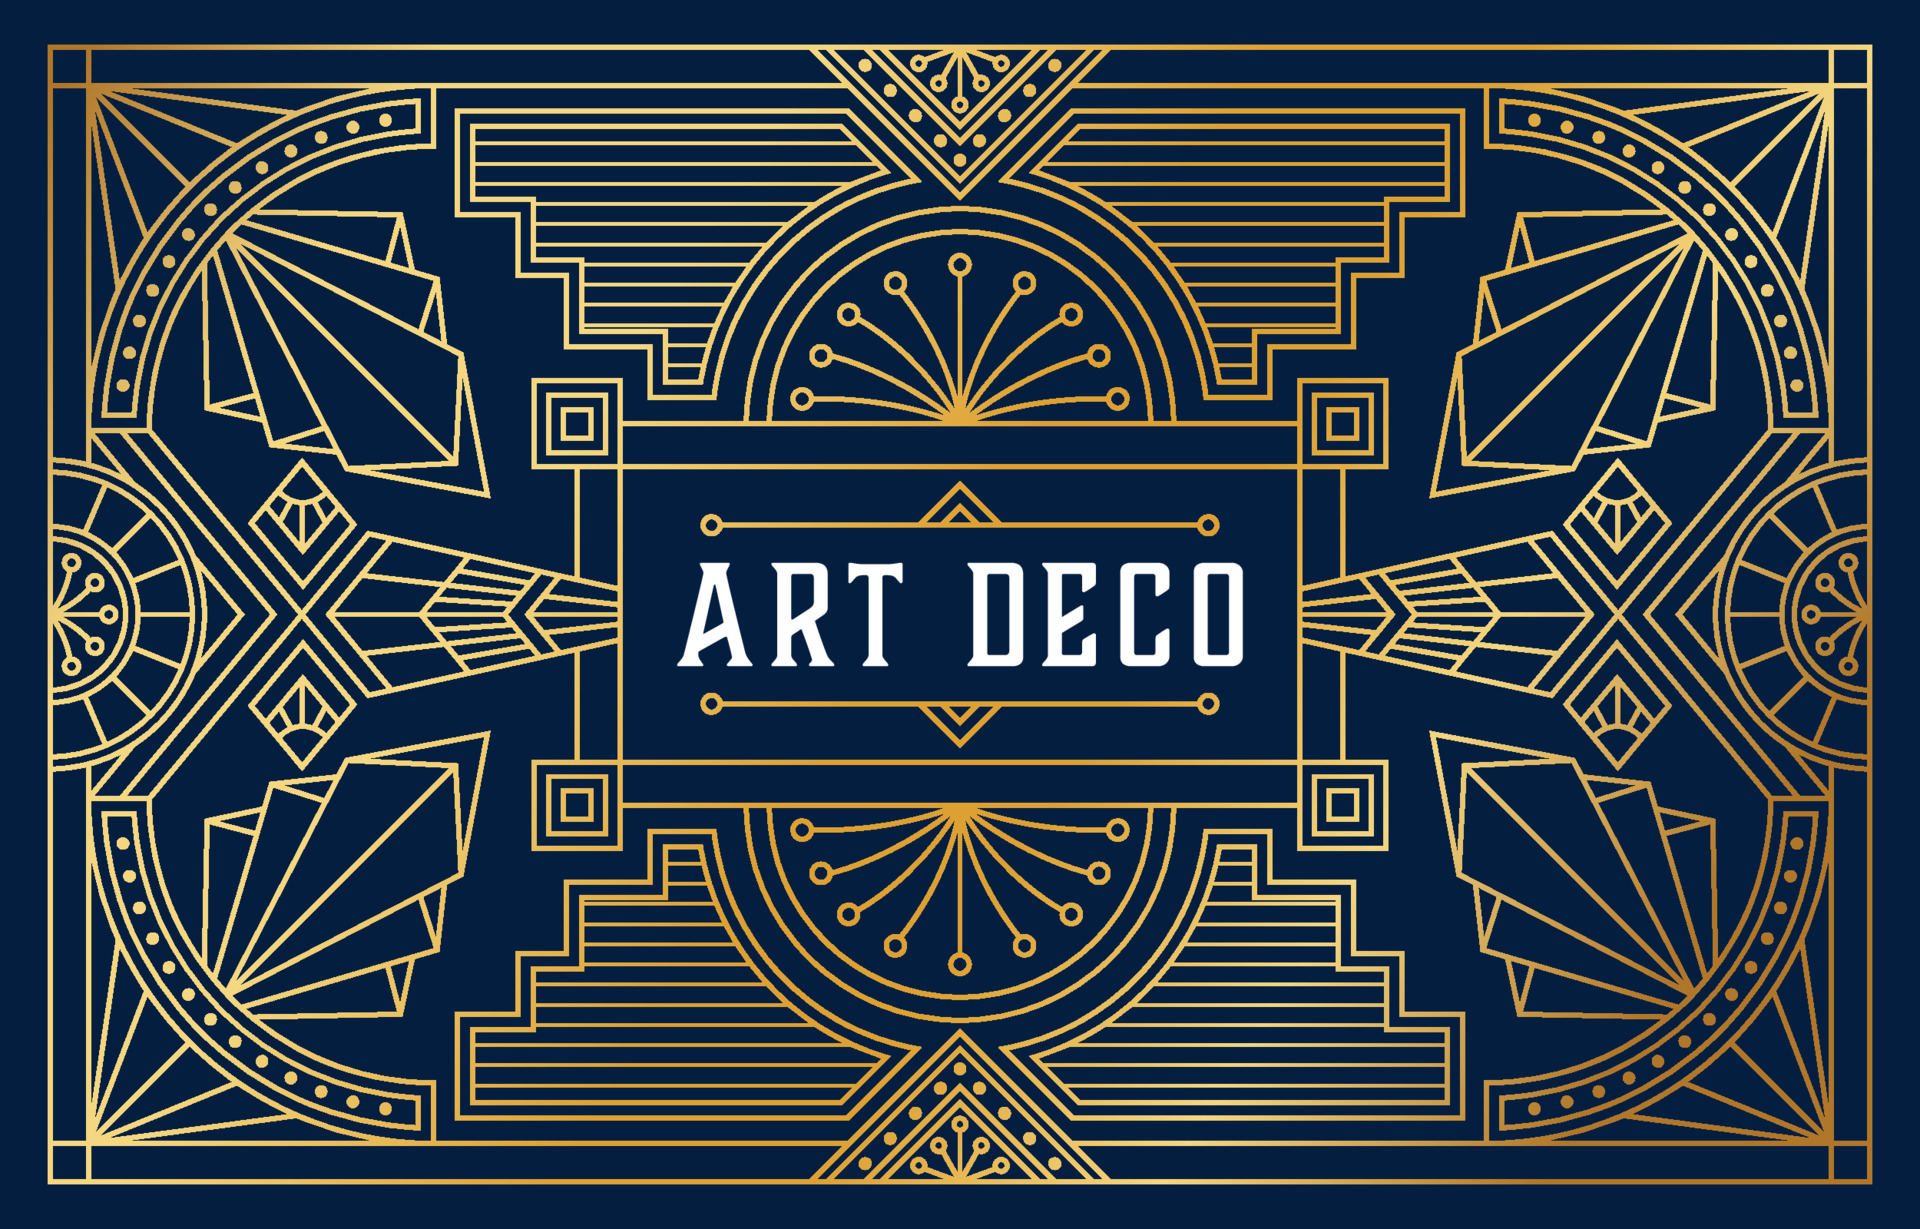 Art Deco Period - Style Characterized by Its Beauty